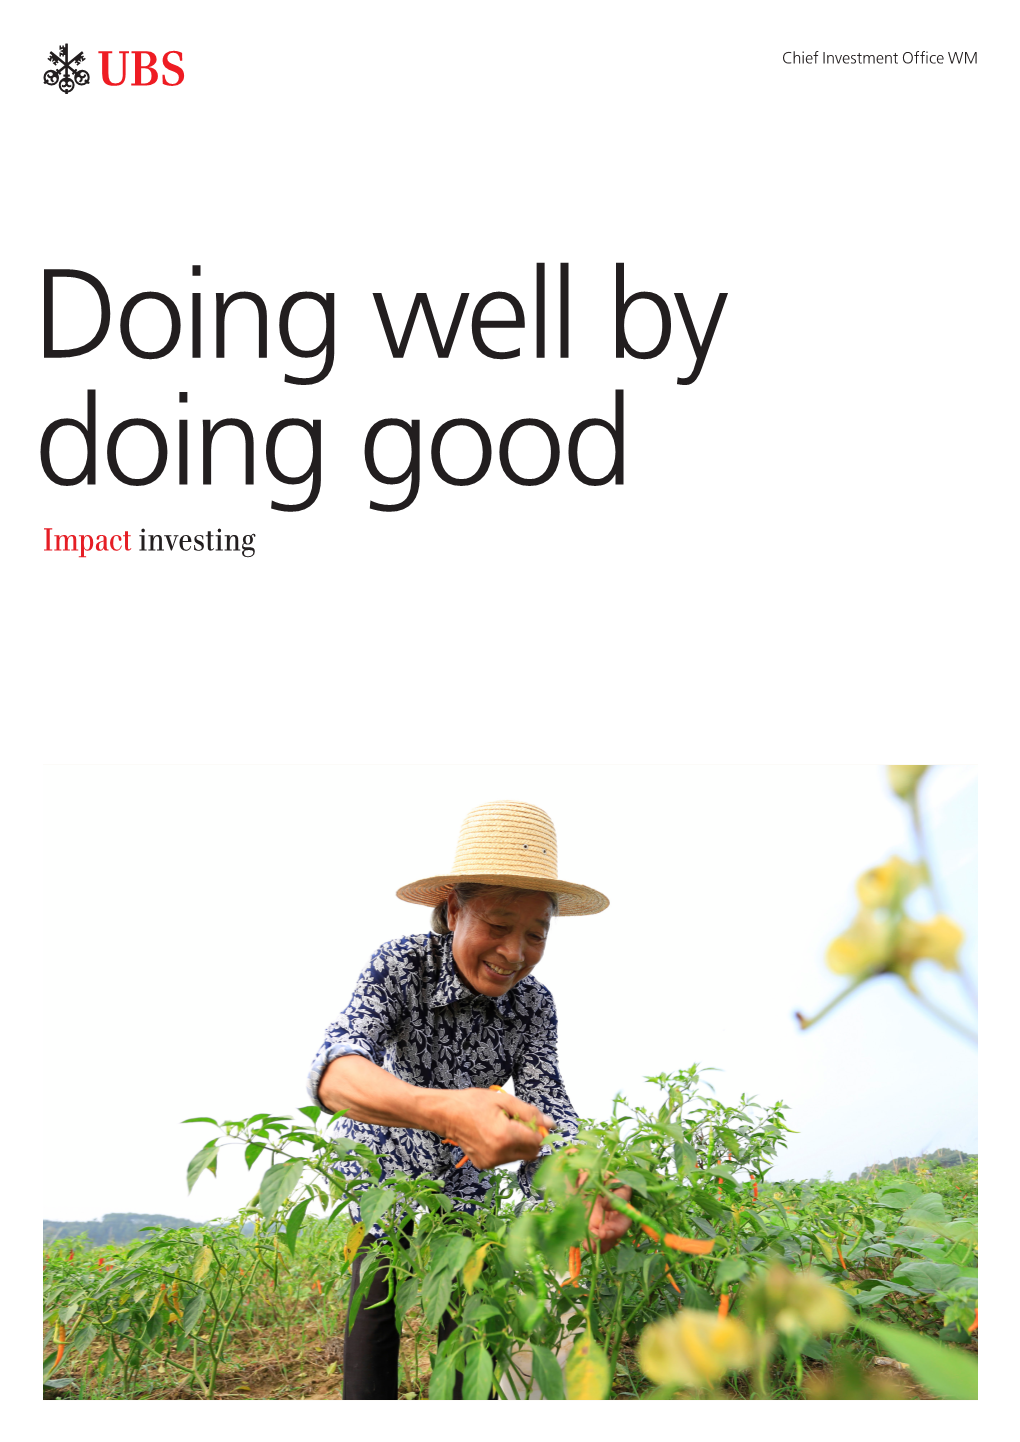 UBS: Impact Investing